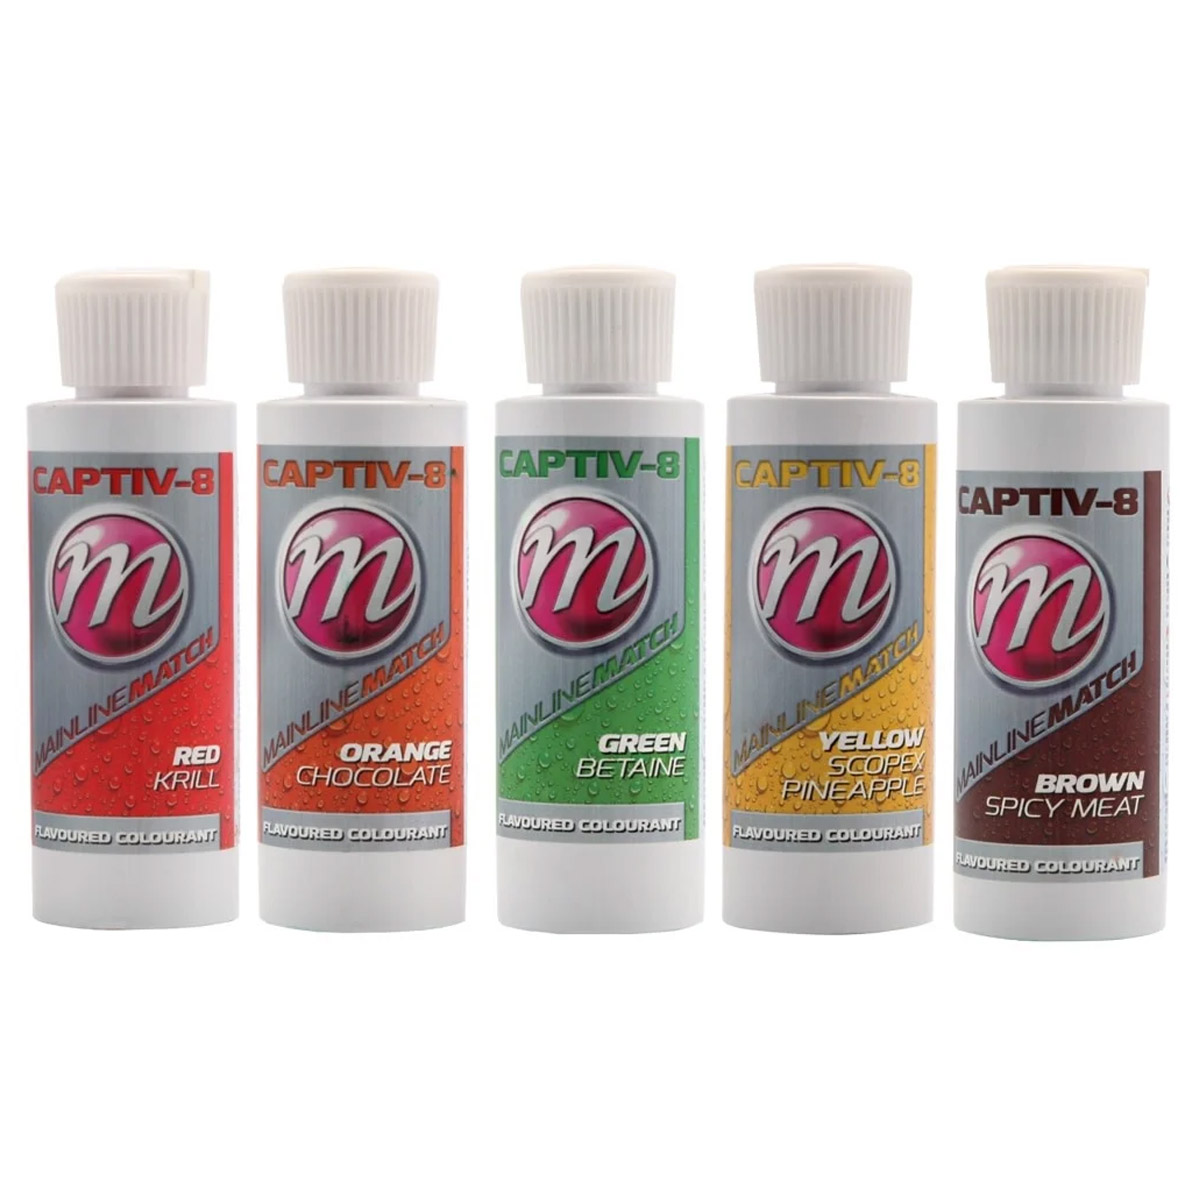 Mainline Flavoured Colourant Brown - Spicy Meat